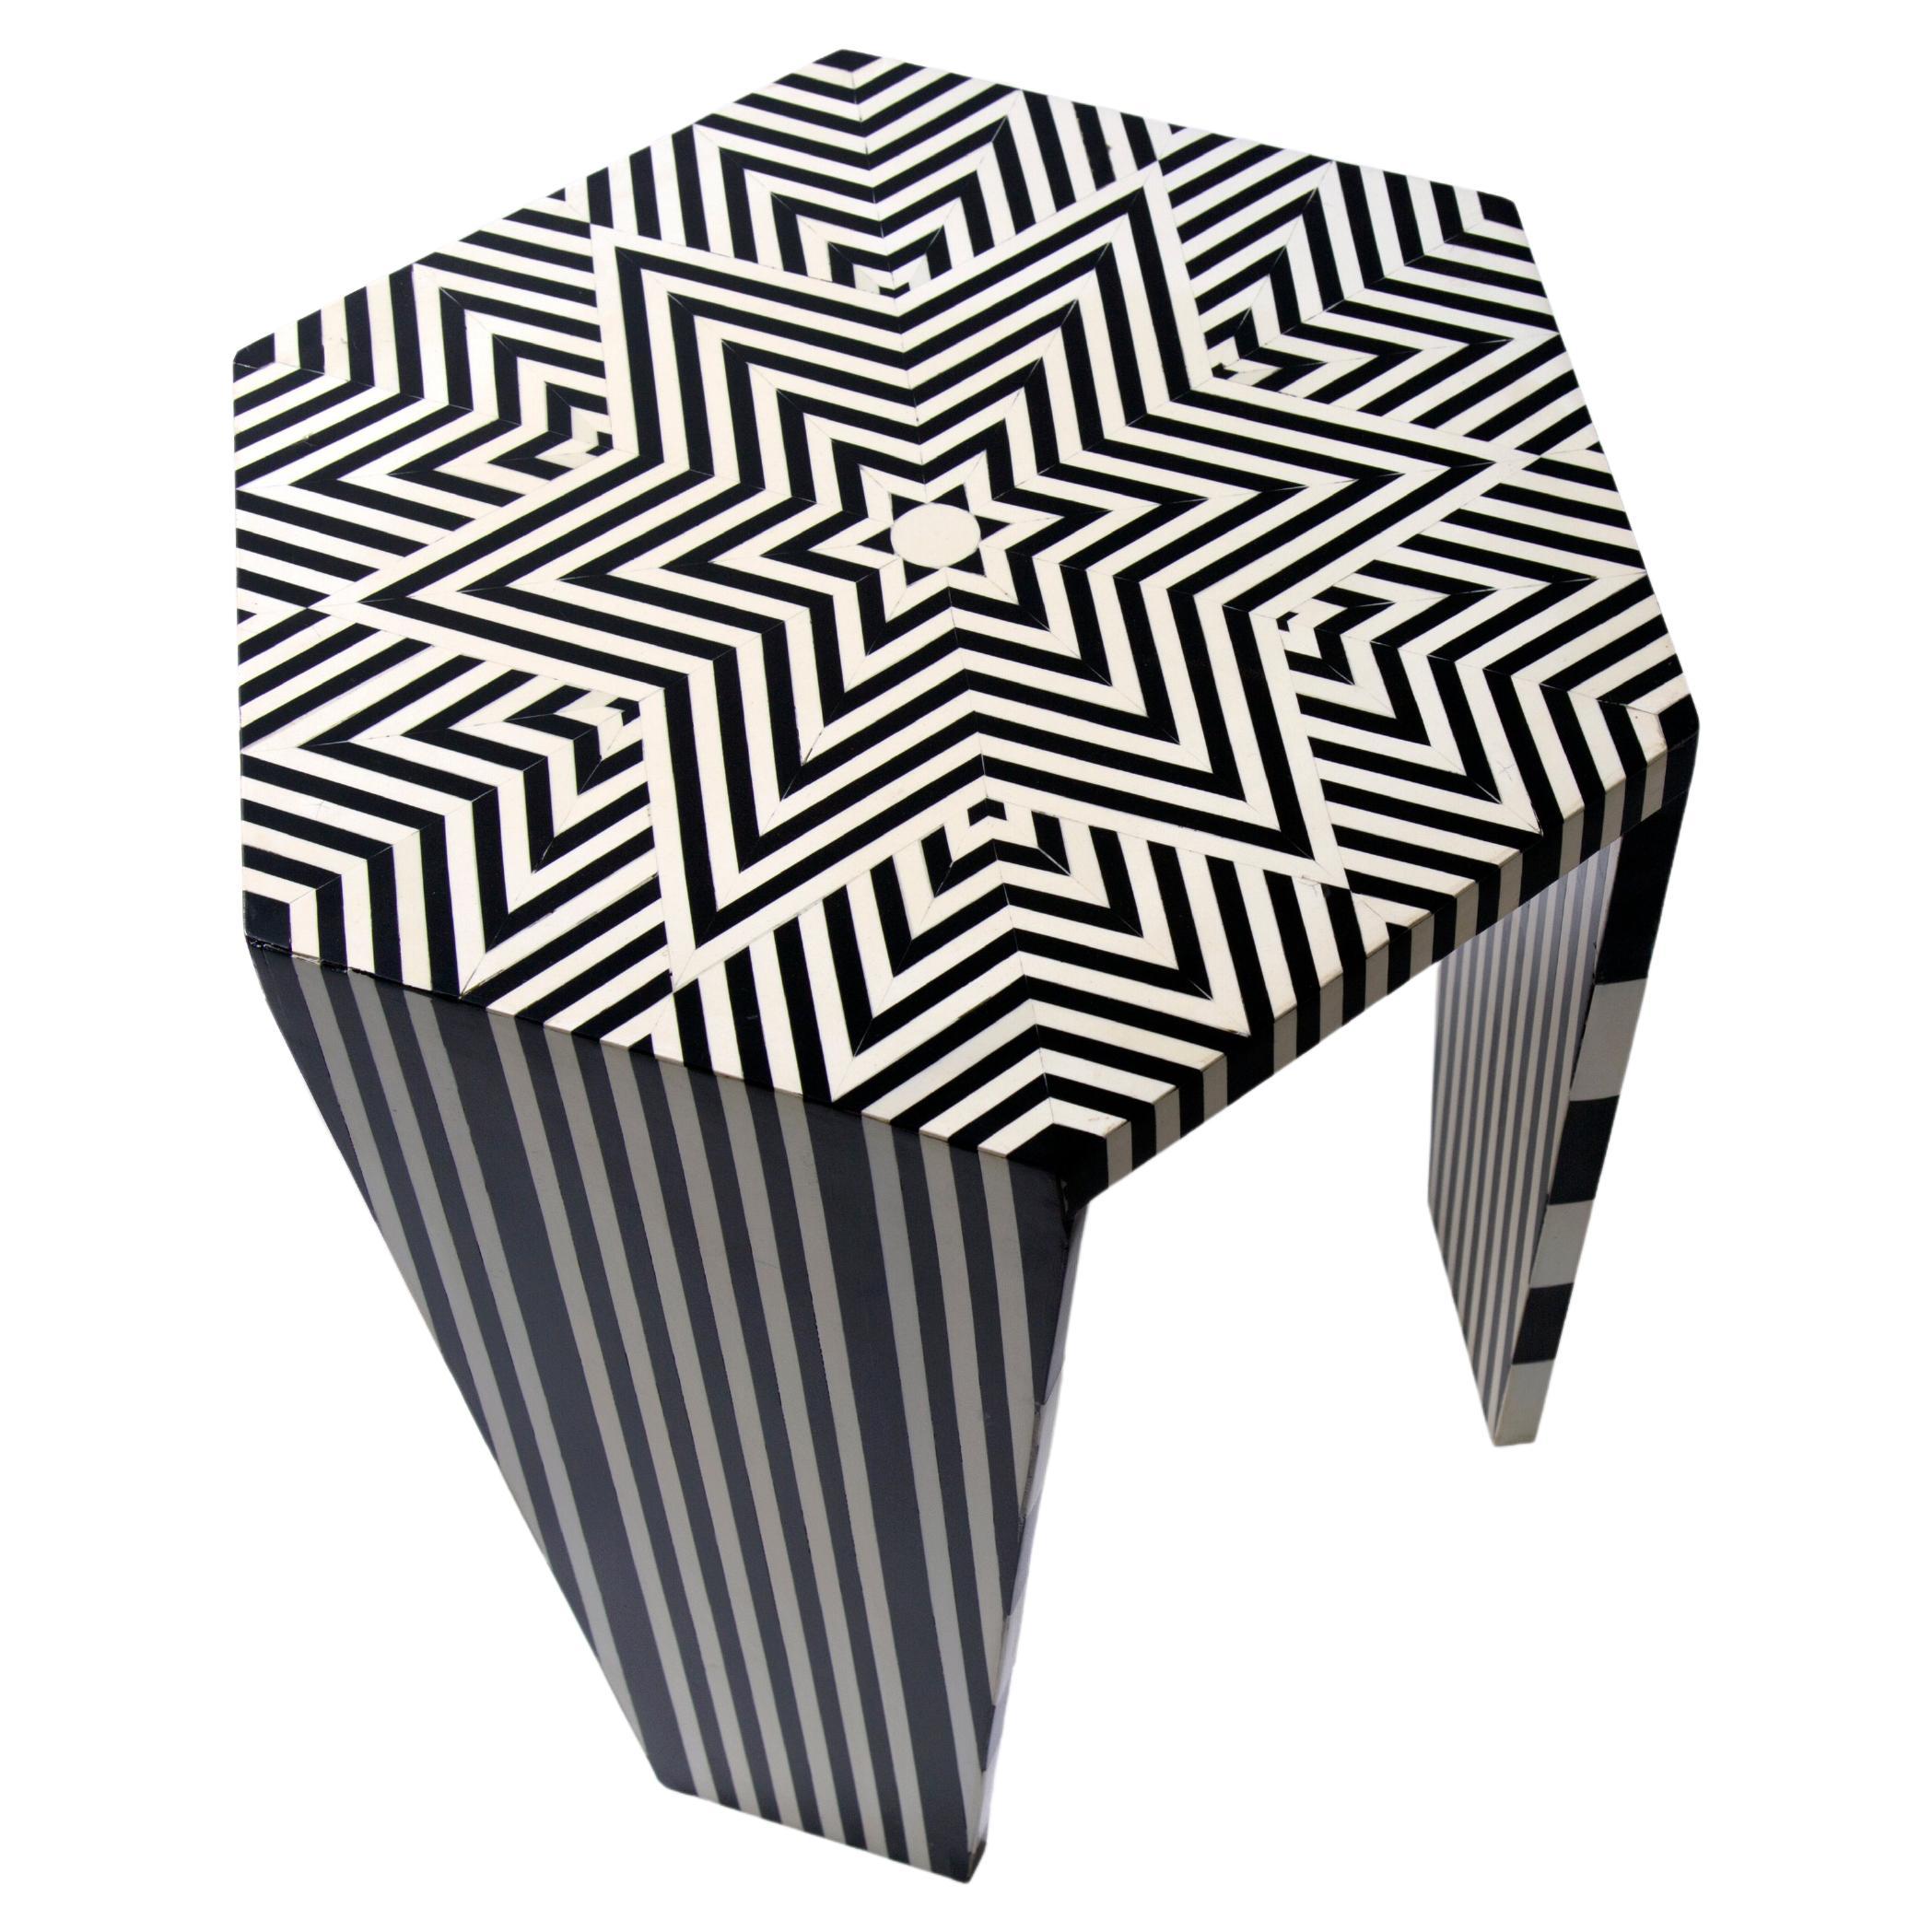 Hand-Crafted Side Table with Black & White Star Pattern Made of Acrylic - Small